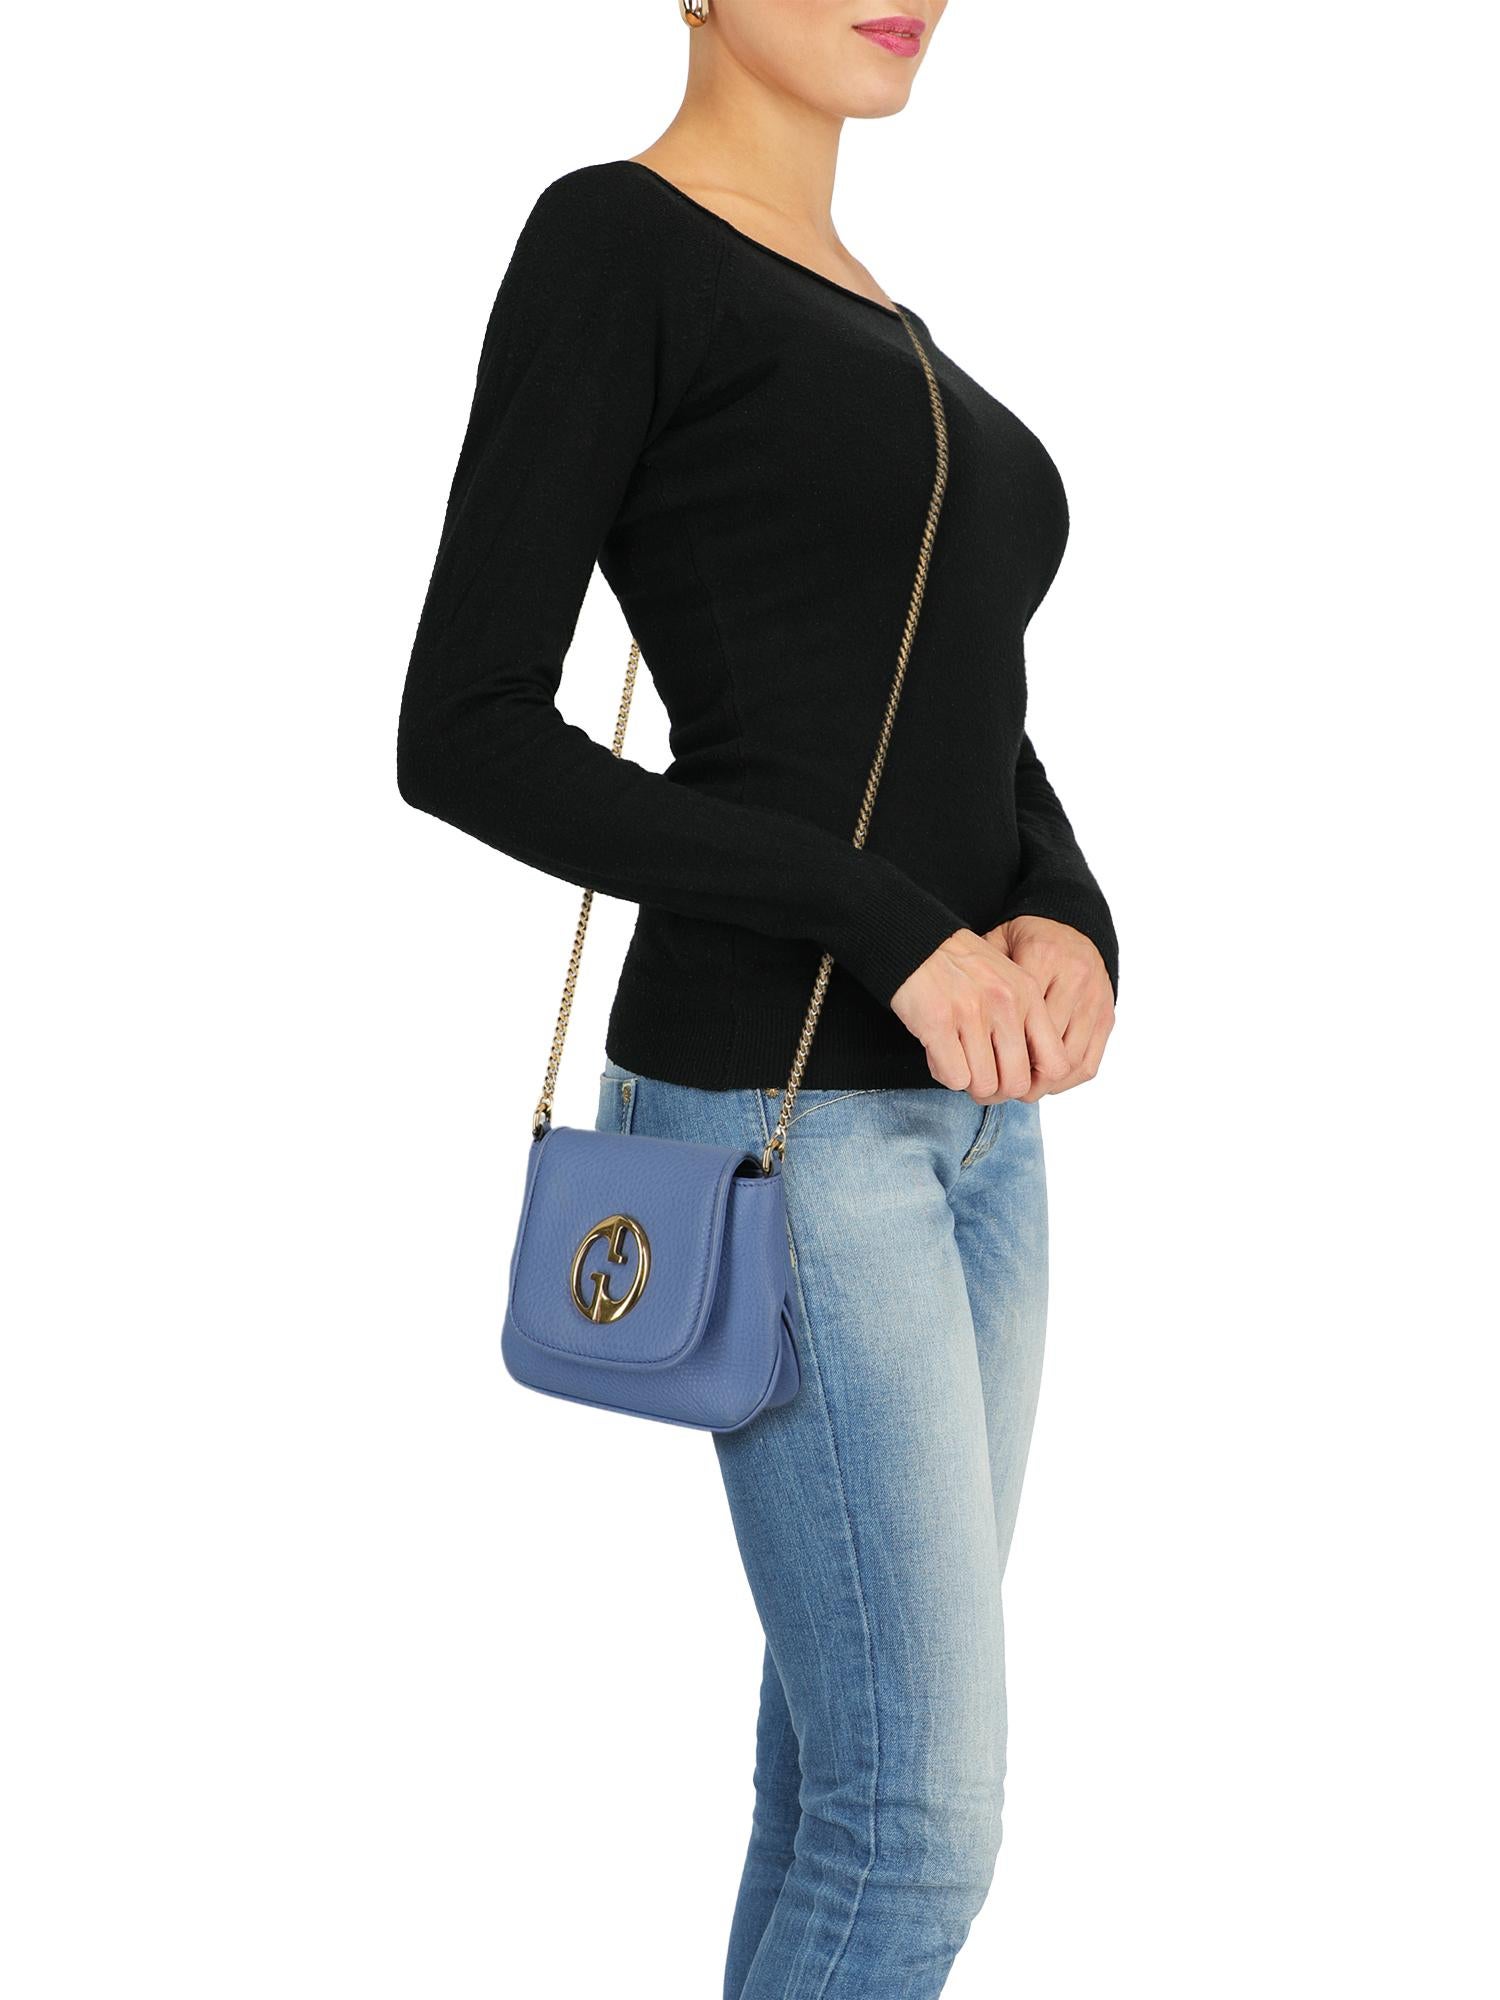 Product Description: 1973, leather, solid color, front logo, button fastening, gold-tone hardware, internal pocket, suede lining, mini bag

Includes:
- Dust bag

Product Condition: Very Good
Lining: negligible residues, slightly visible